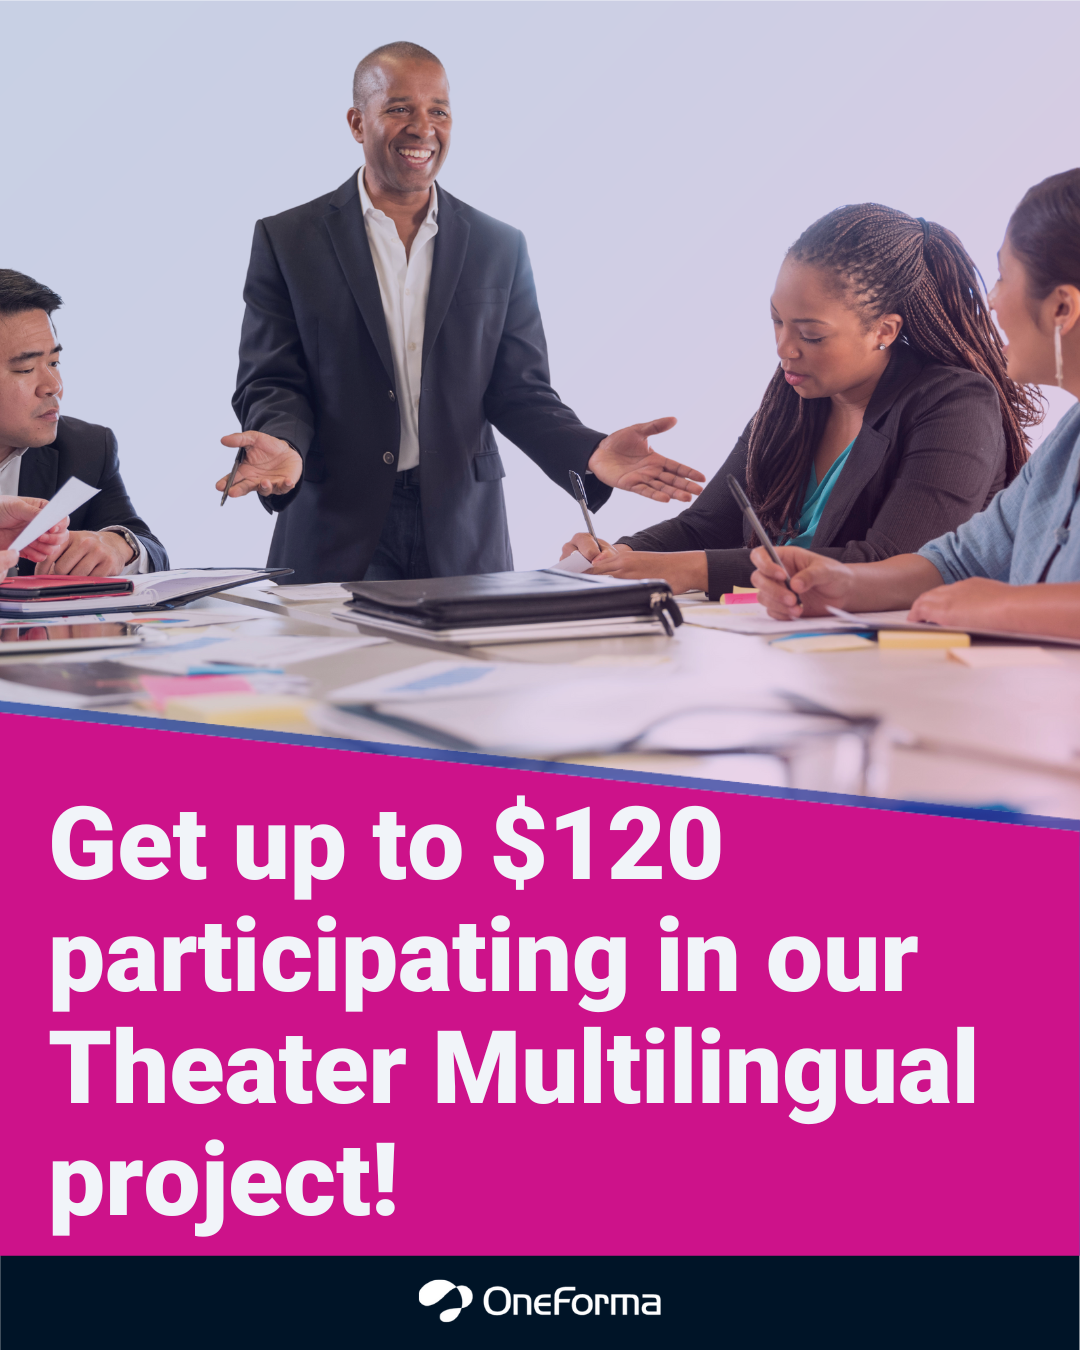 Earn up to $120 with Project Theater Multilingual!